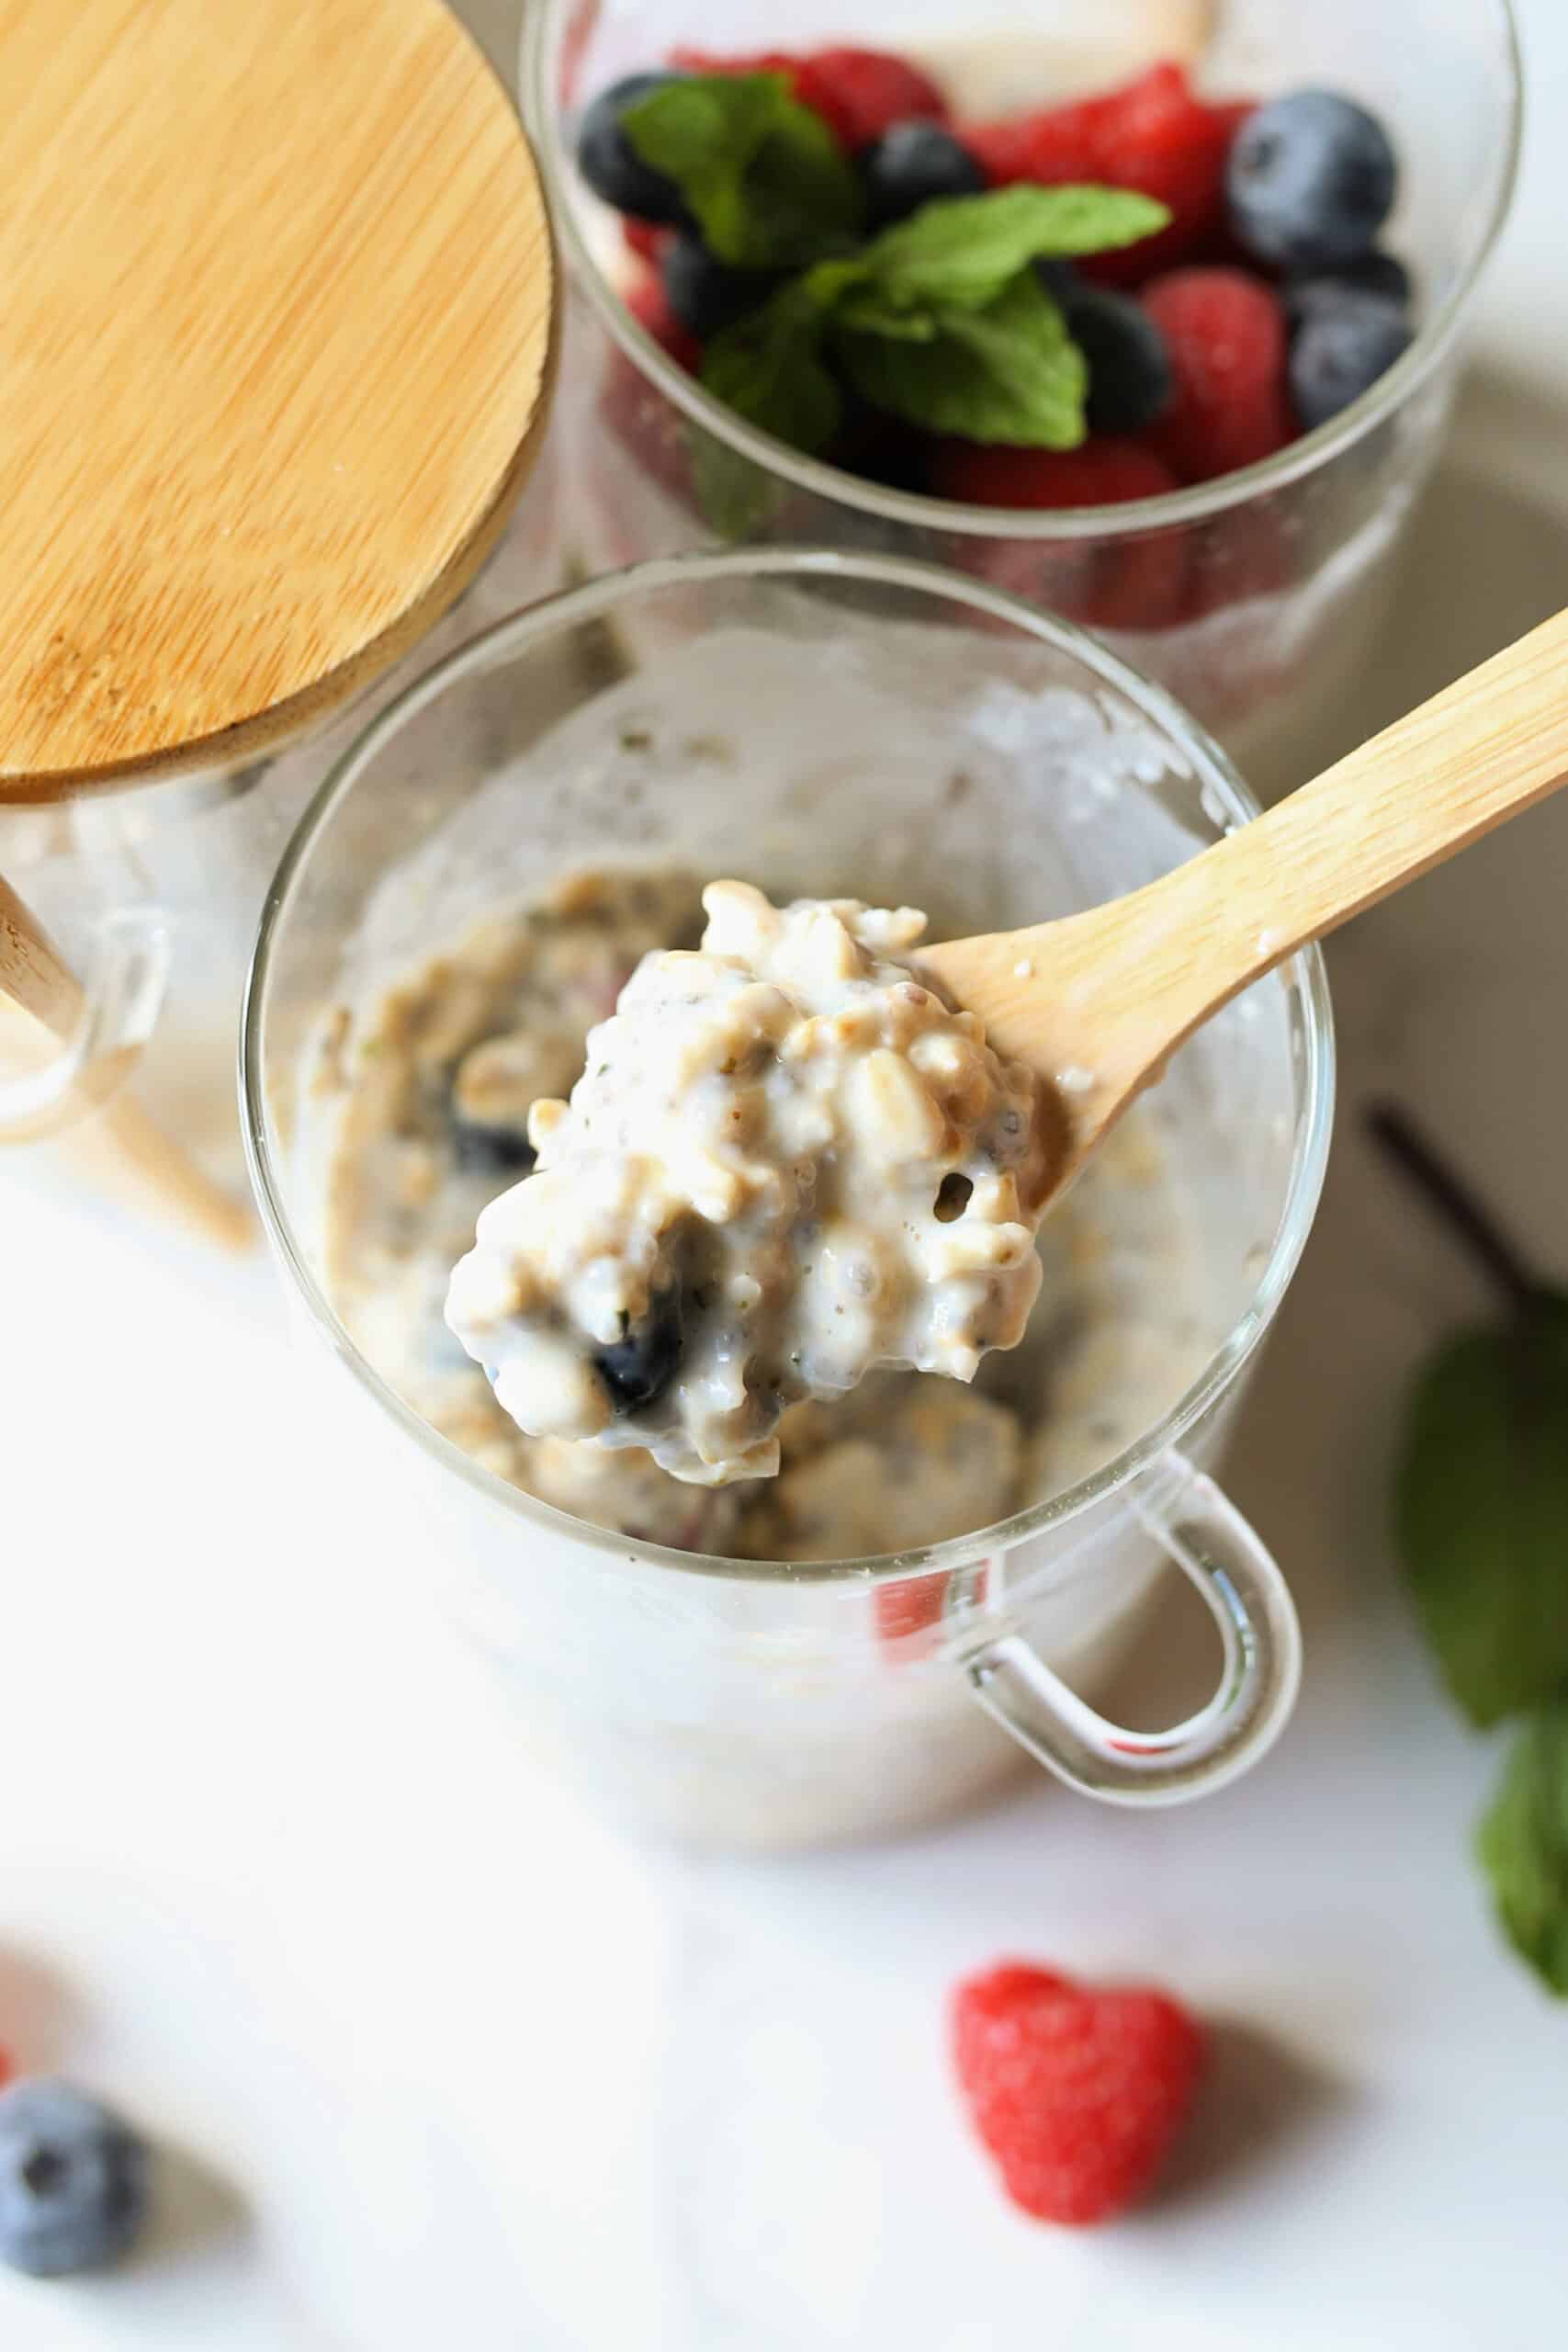 Spoonful of overnight oats.